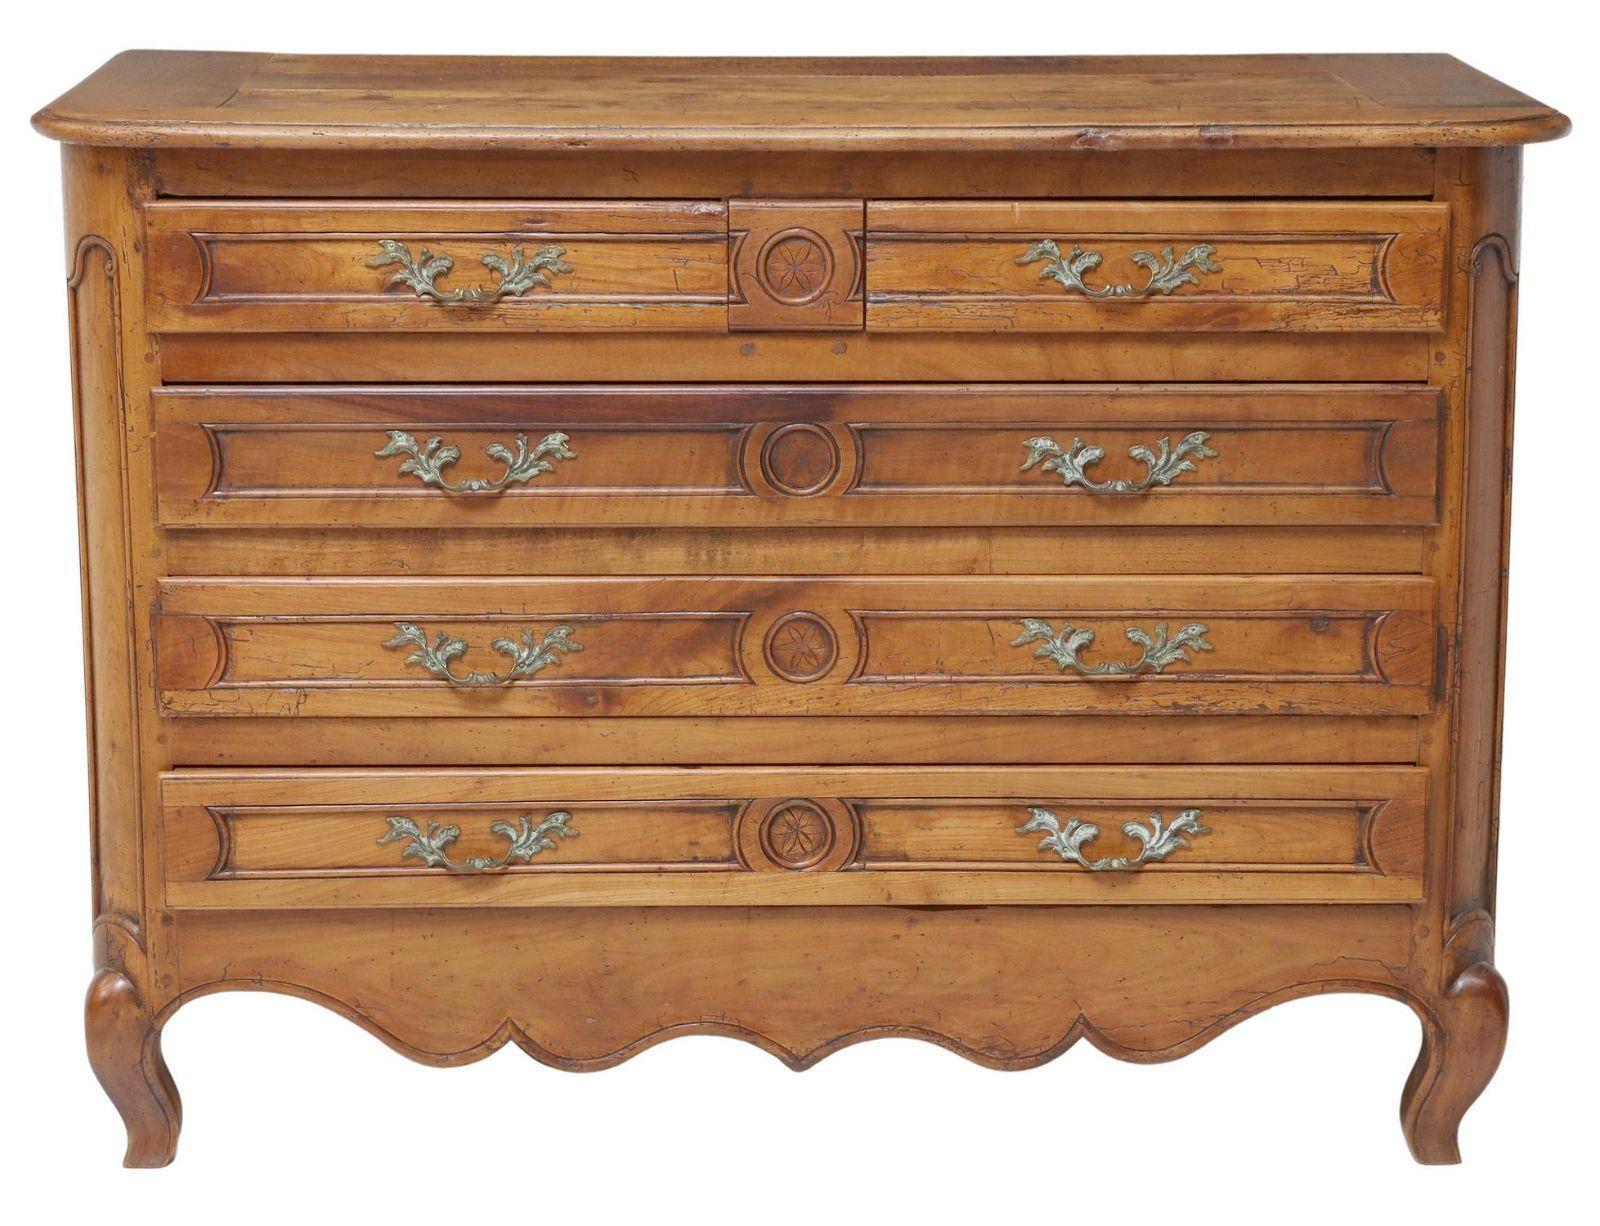 Antique French Louis XV style fruitwood five drawer commode, 18th/19th c. This commode features two short drawers over three long drawers, rising on short cabriole legs, restorations.
Beautiful and rich patina.

Dimensions
approx. 34.25